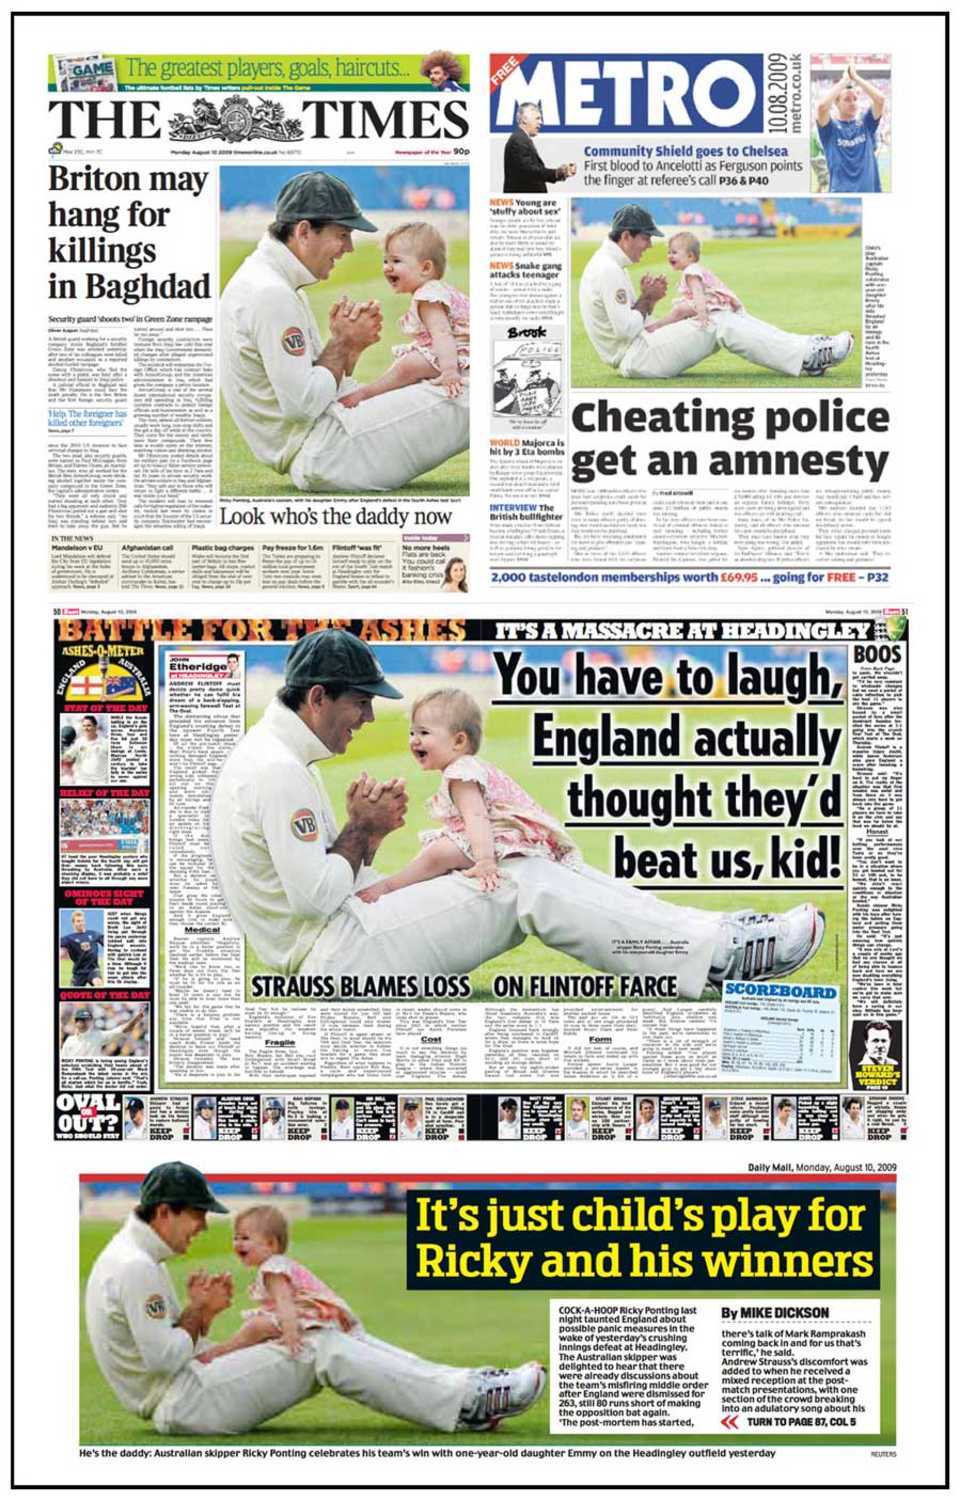 Newspapers feature a photo of Ricky Ponting with his daughter